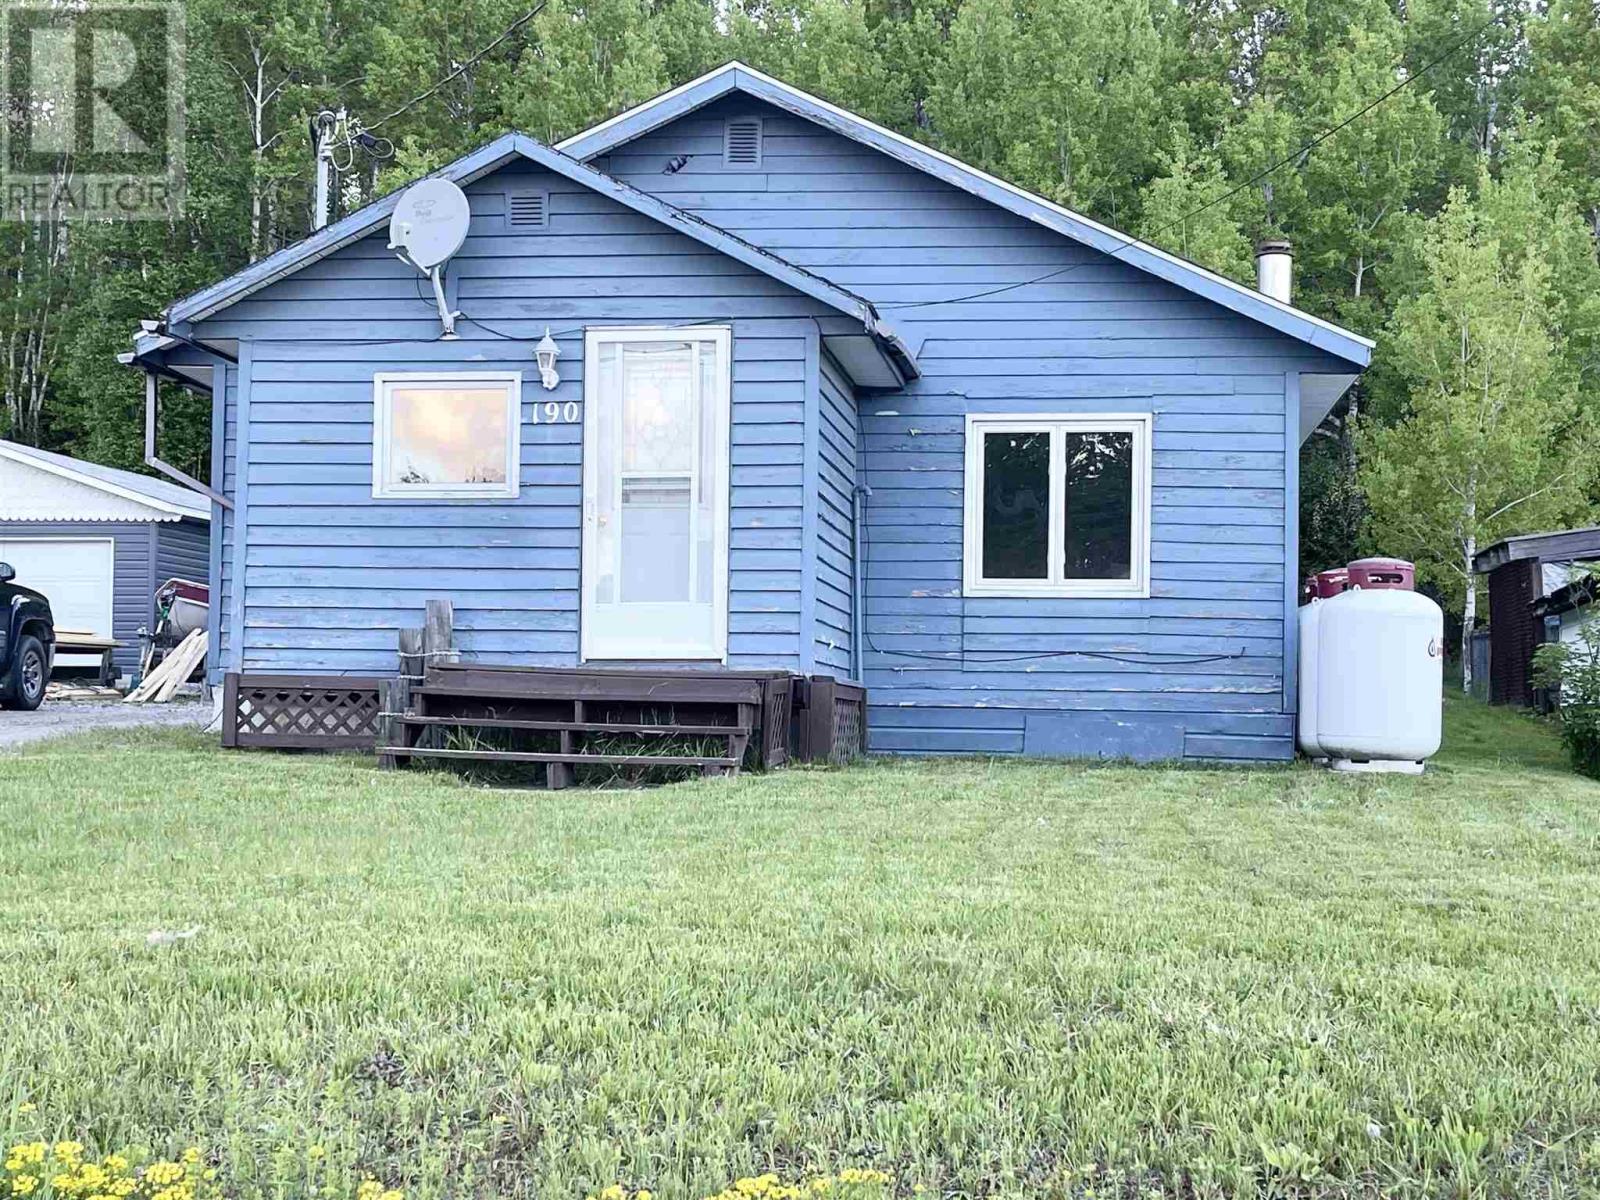 190 Martel RD located in Chapleau, Ontario